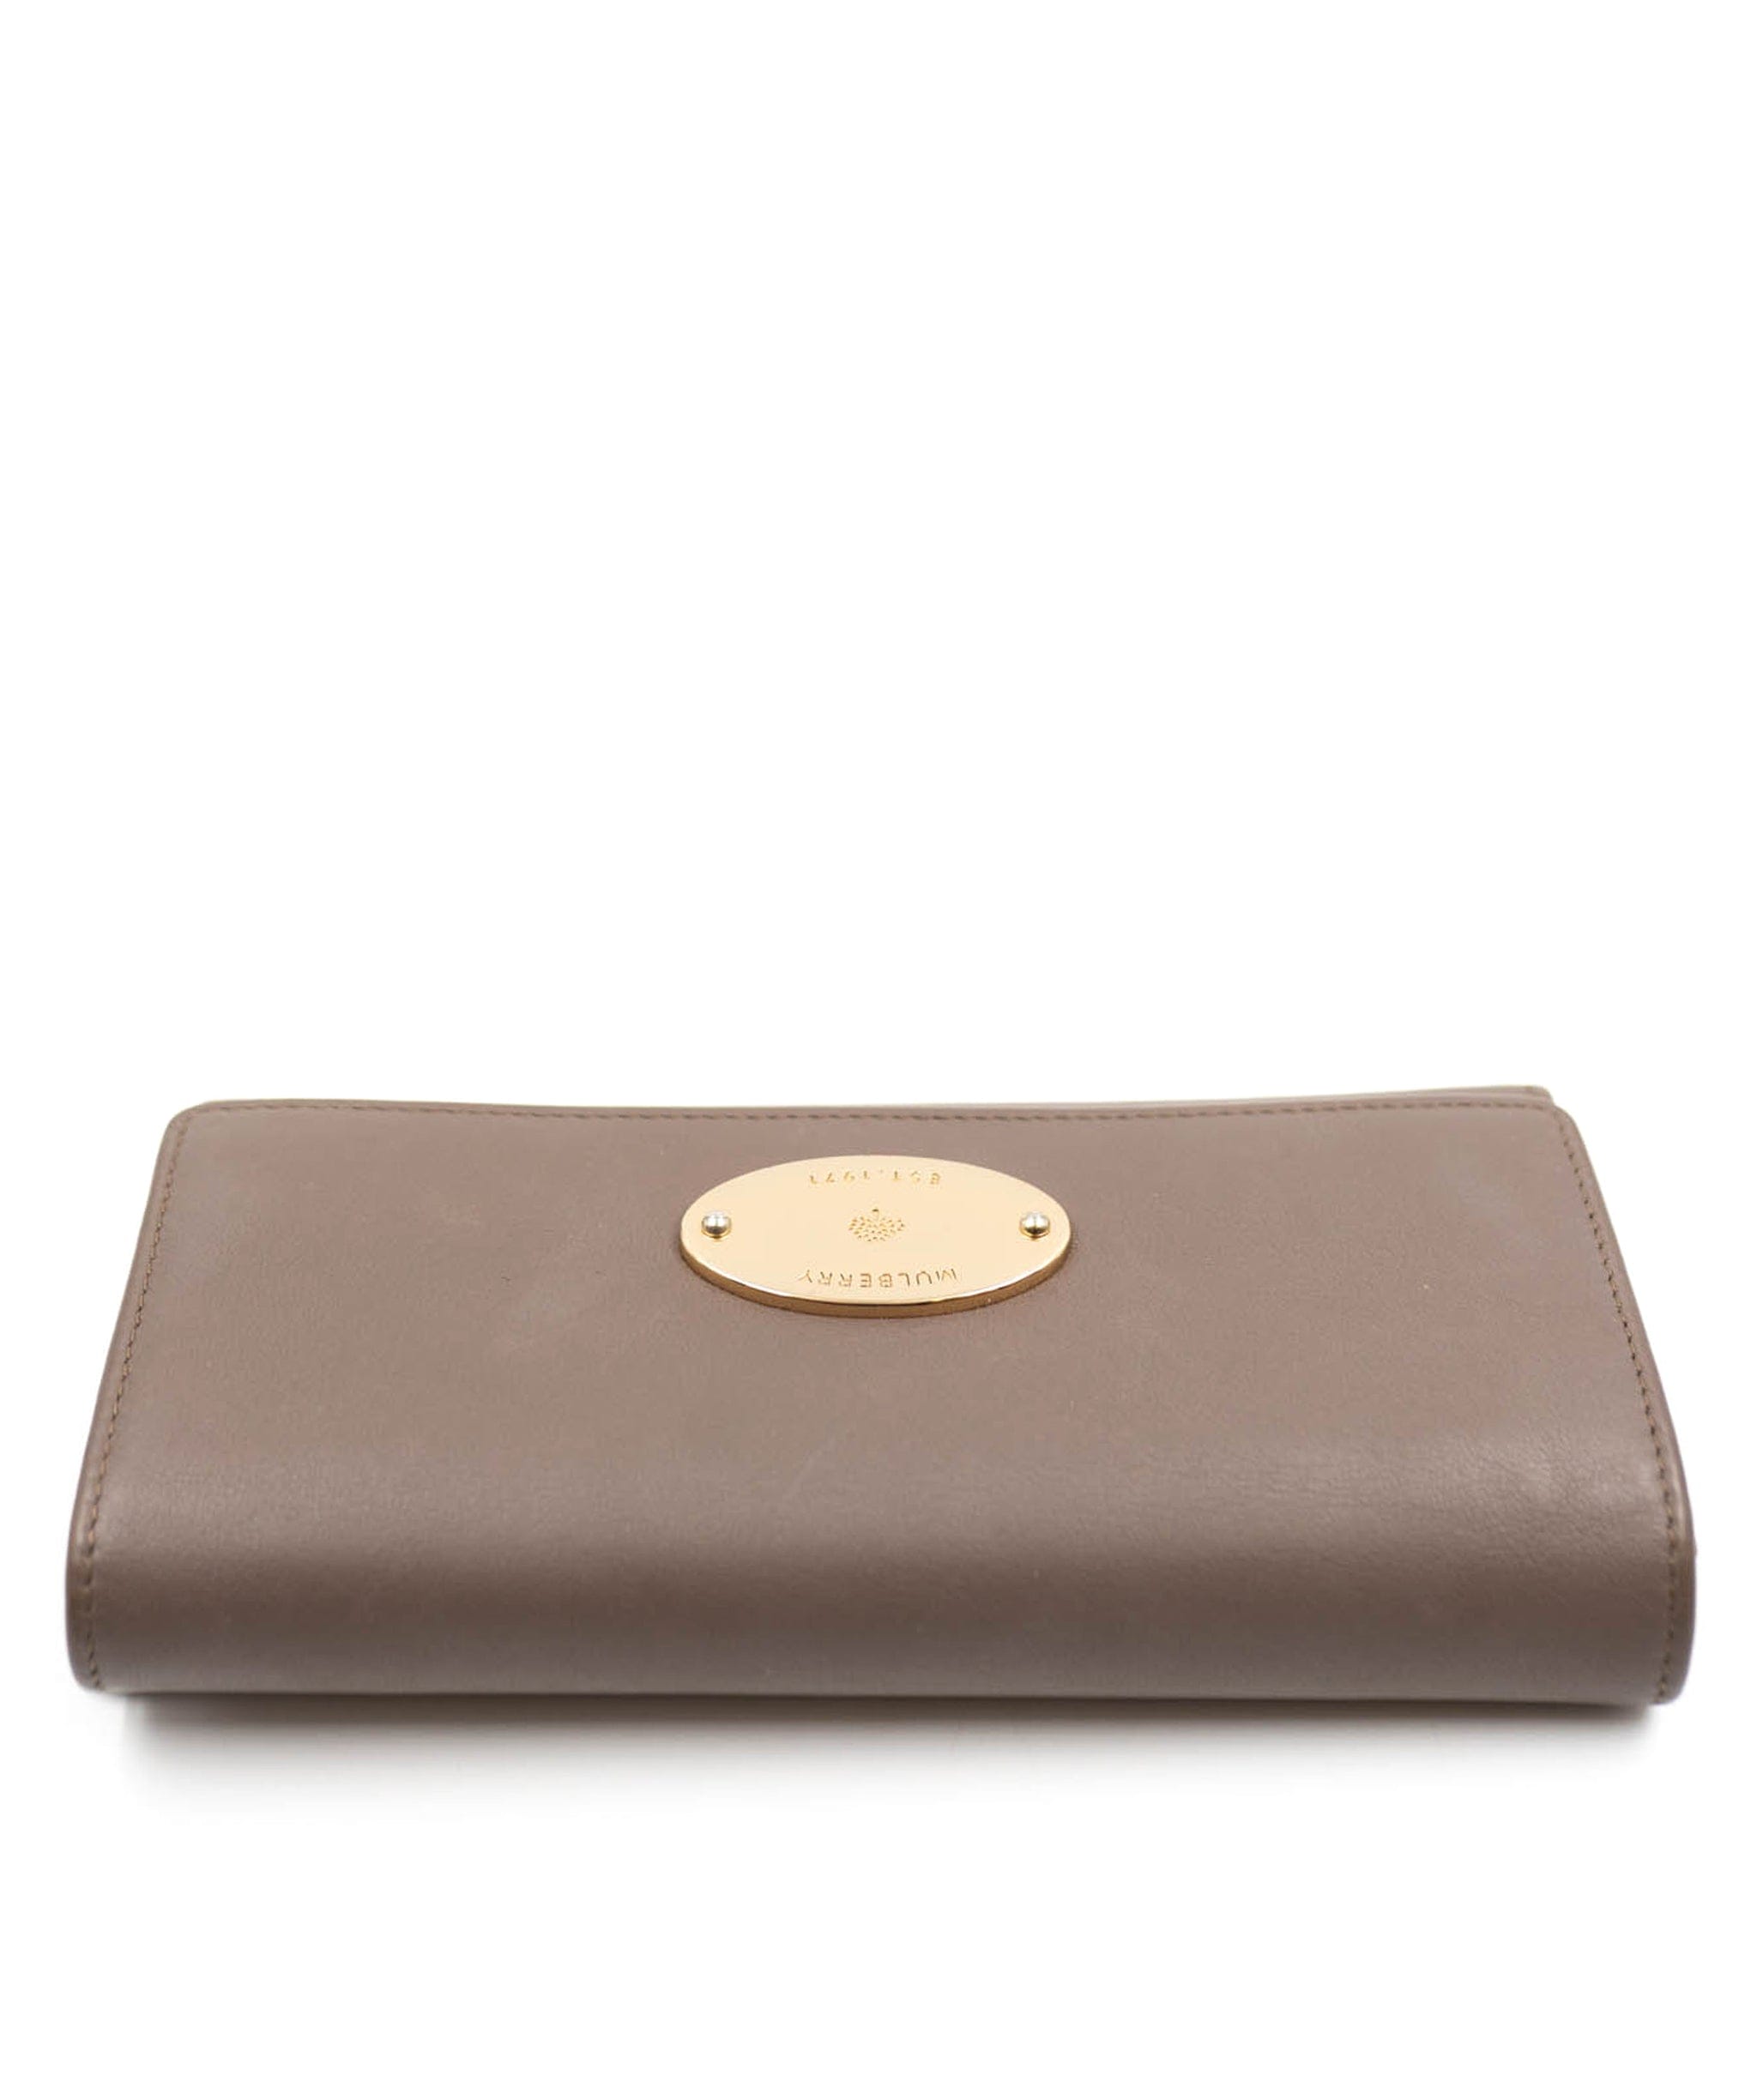 Mulberry Mulberry taupe continental wallet  - AGL2011